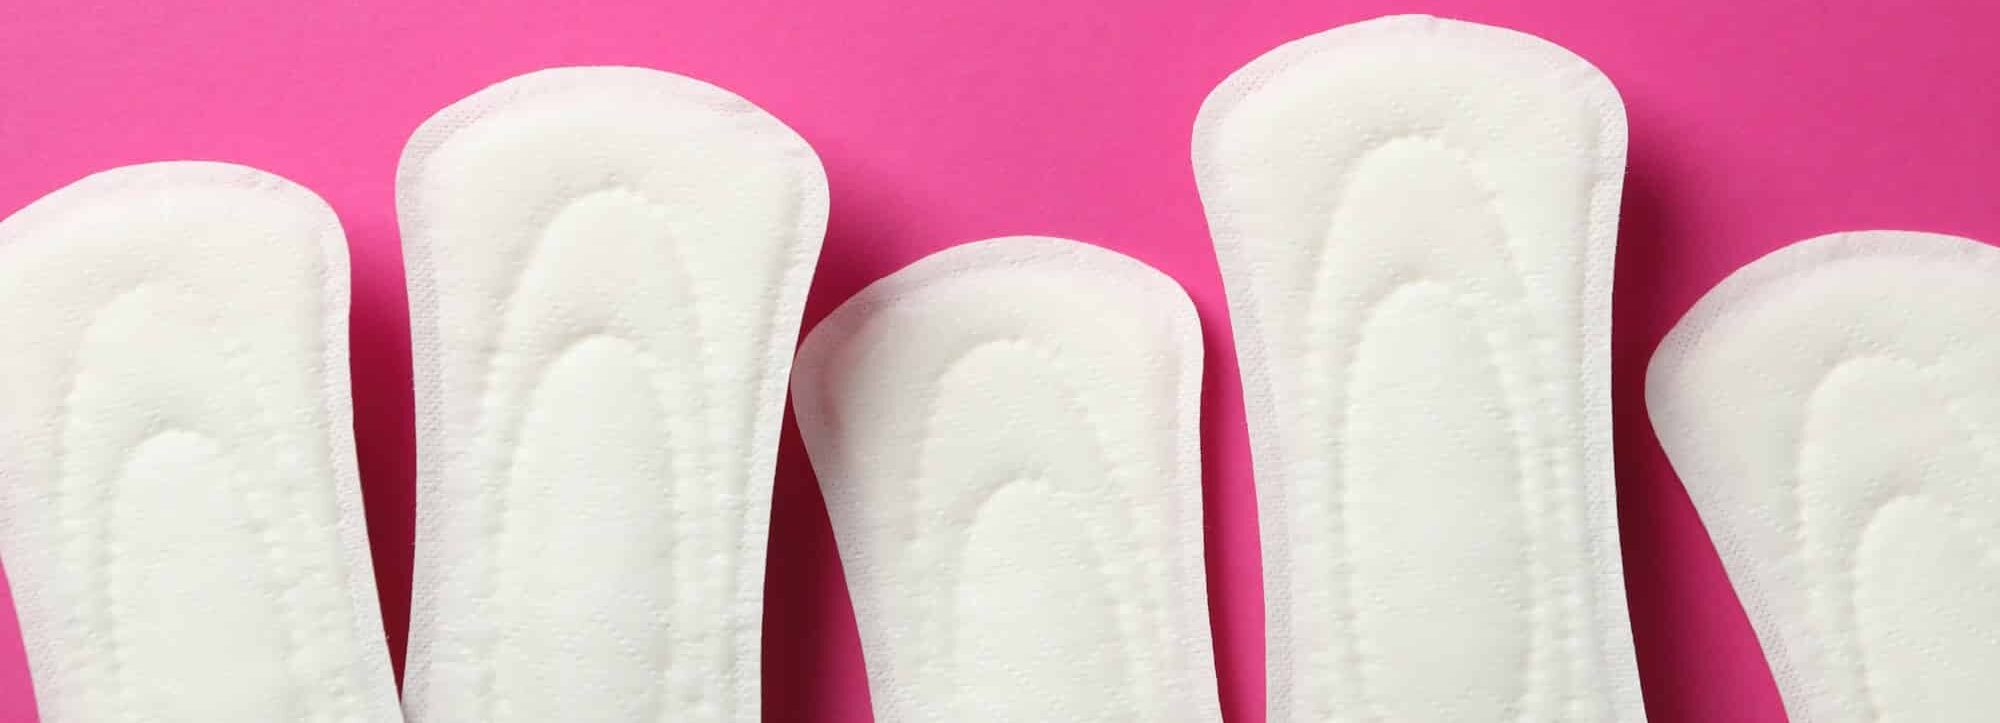 Sanitary pads frame on pink background, space for text